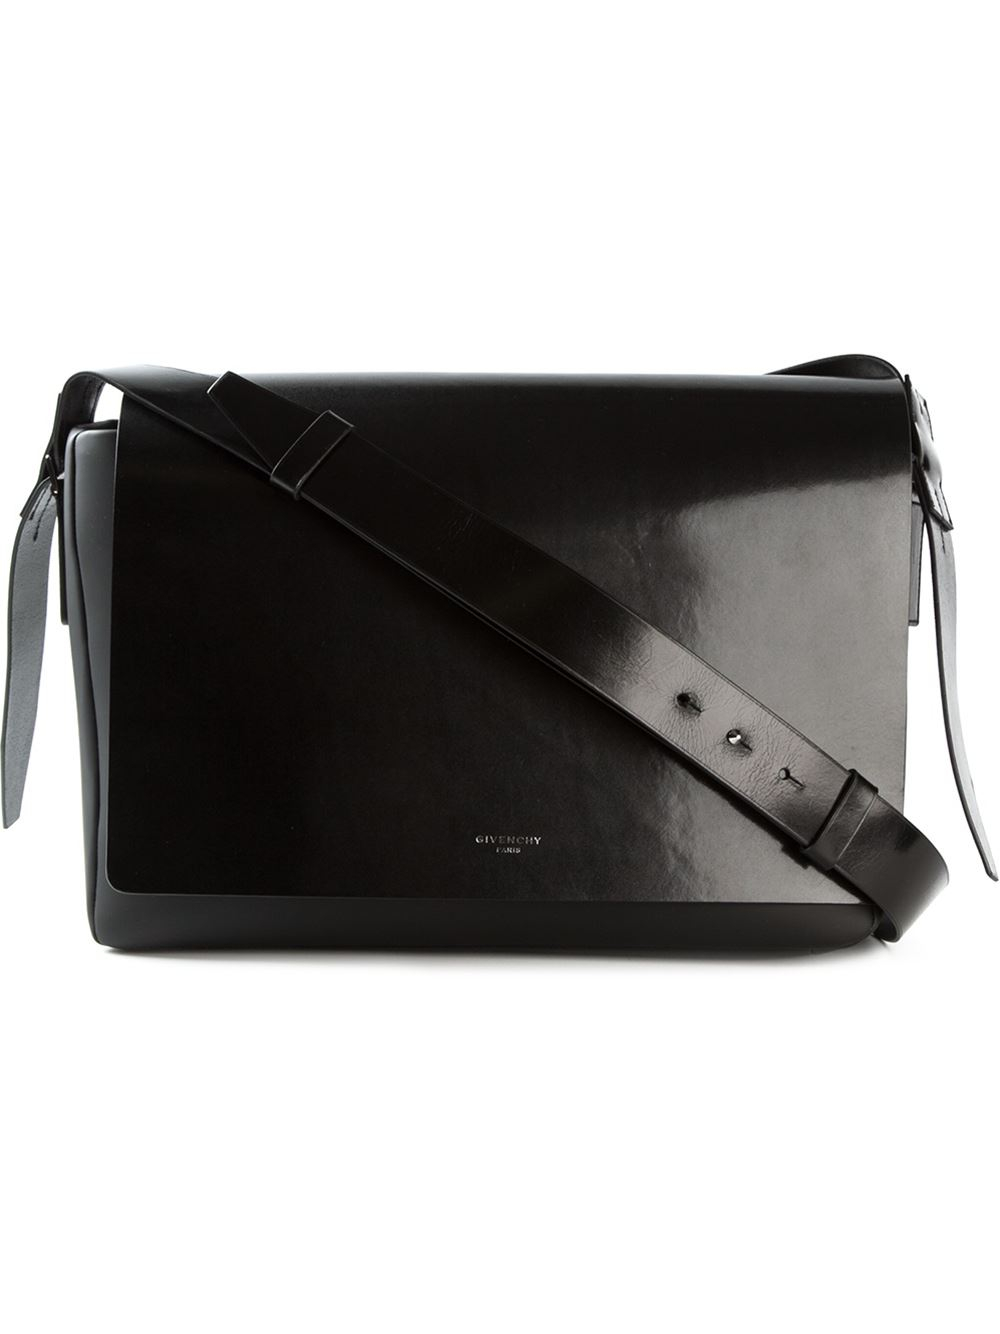 Givenchy Classic Messenger Bag in Black 